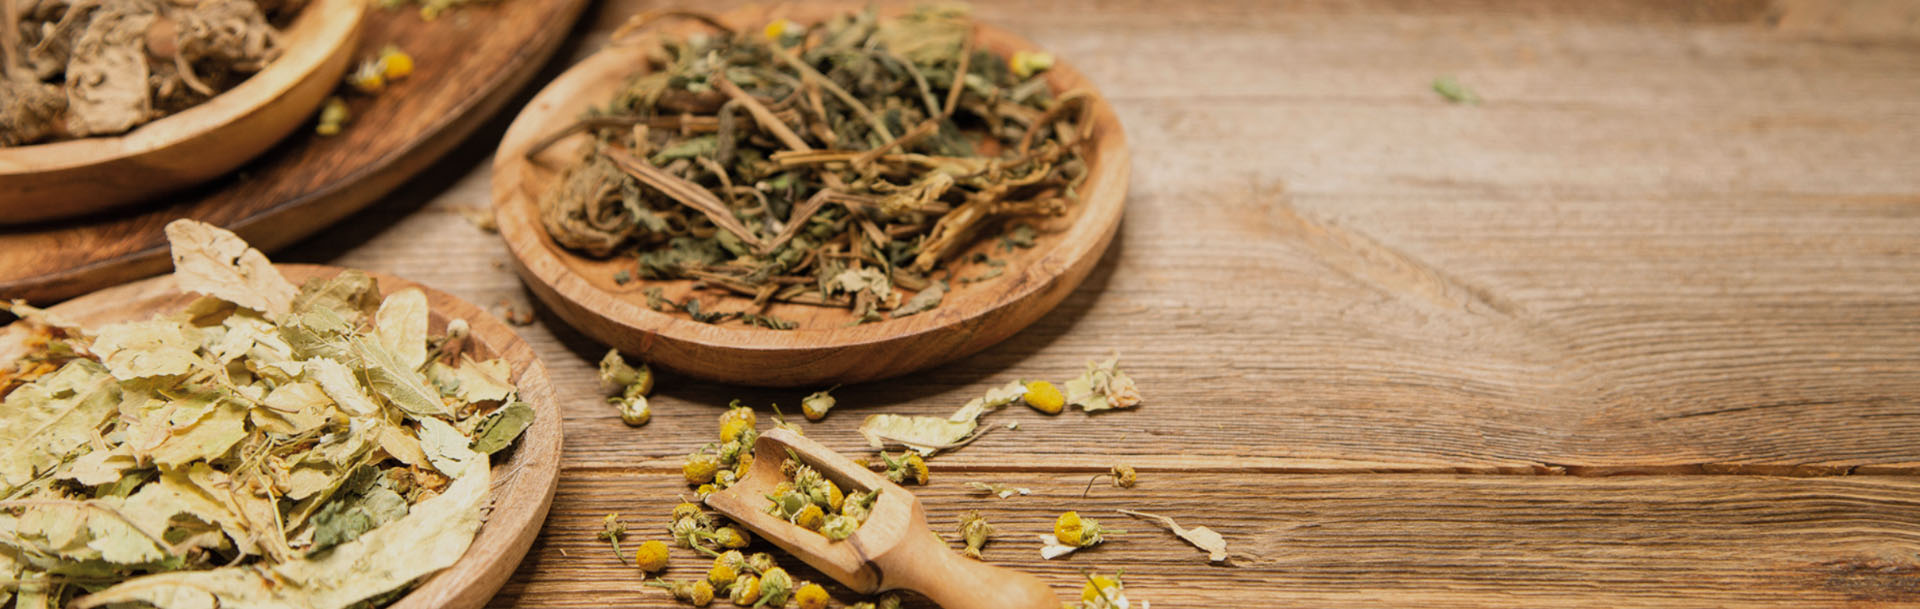 dried leaves, herbs, plants and chamomile lie on a wooden table